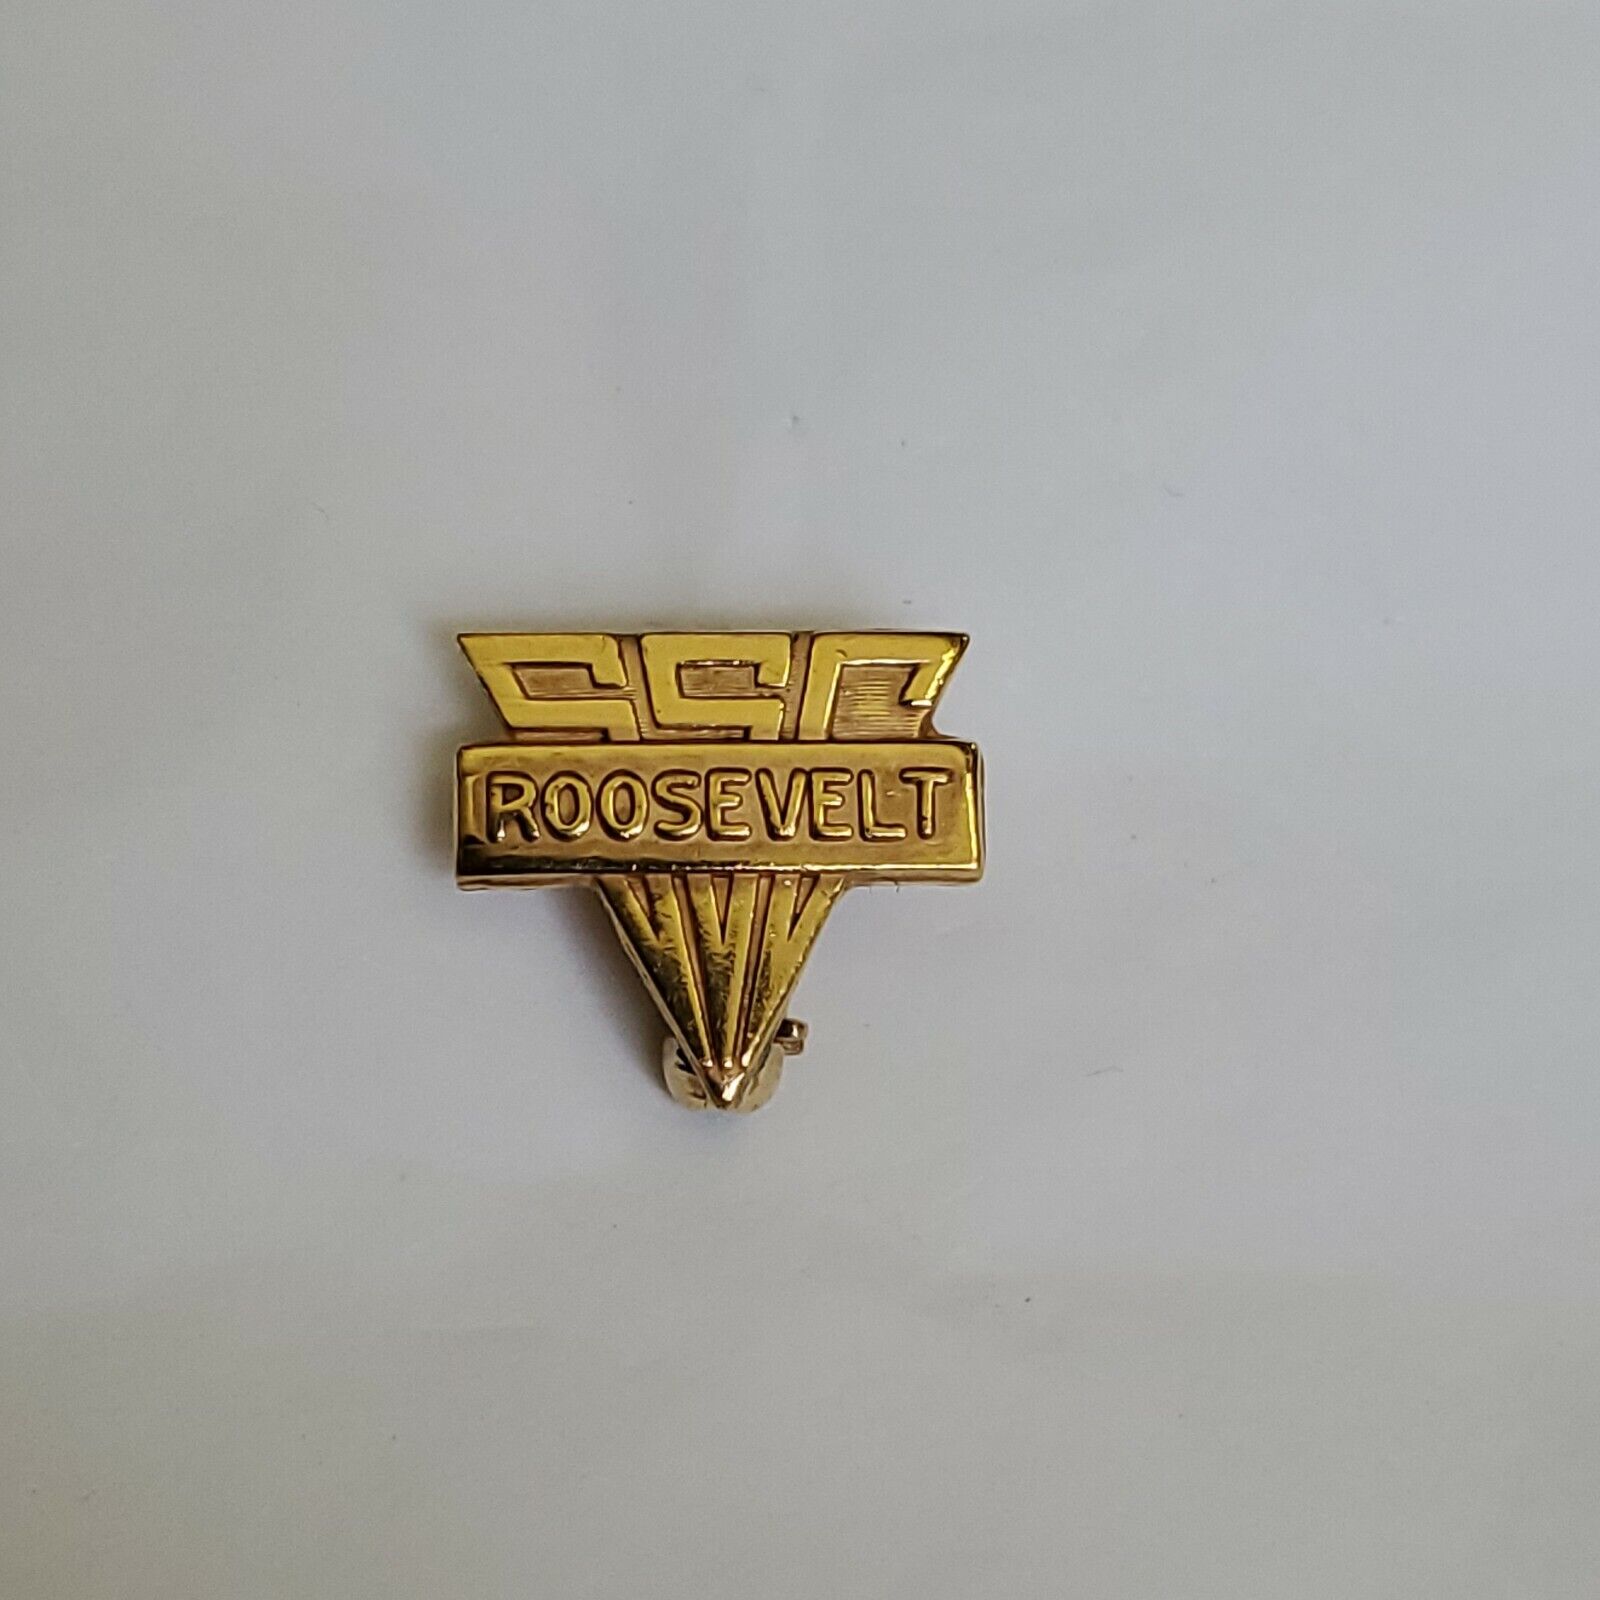 SSC Roosevelt Pin School Site Council Very Small Gold Colored San Leandro CA